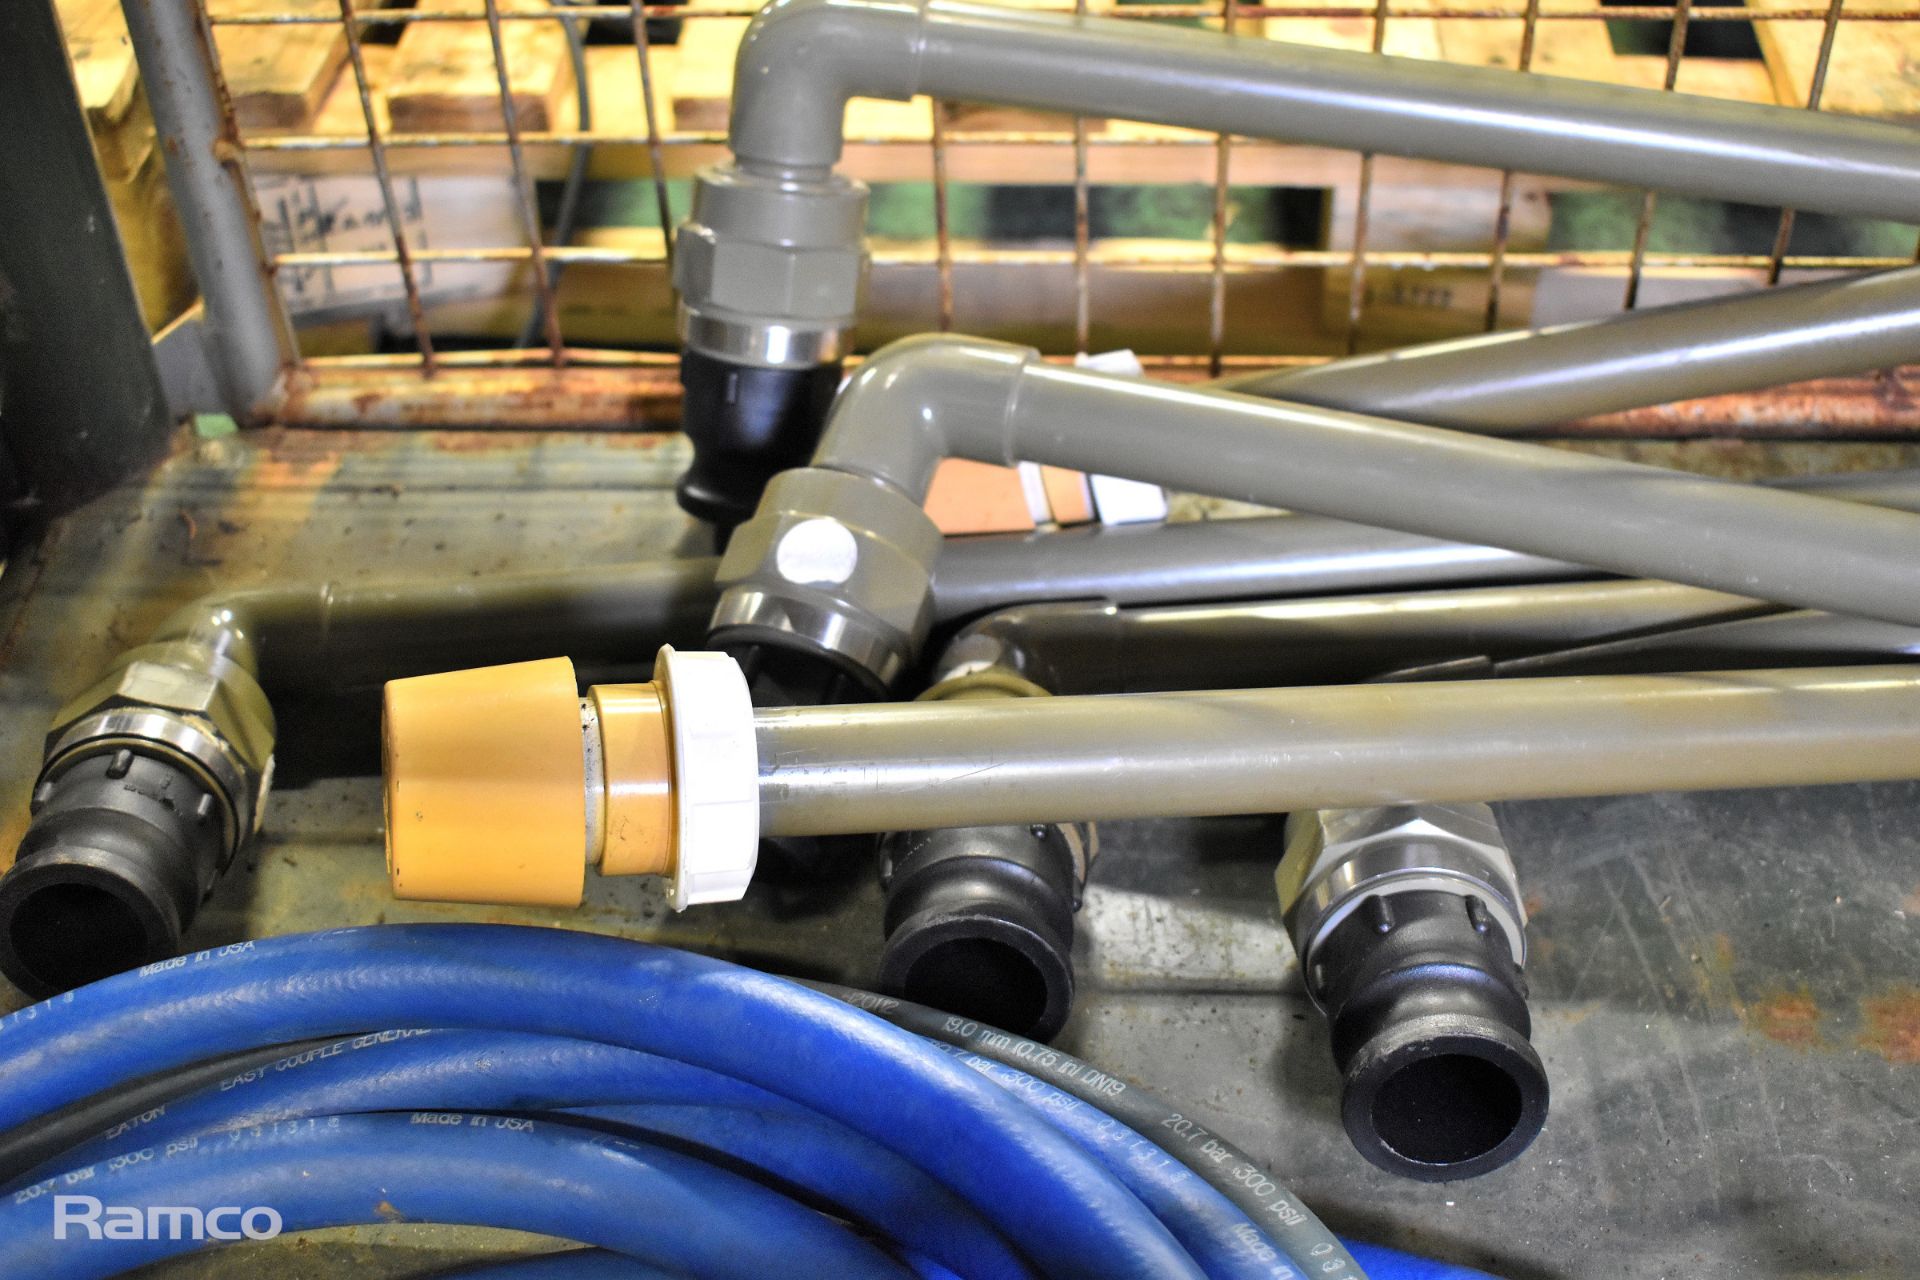 Plumbing attachments, extensions and multipurpose flexible pipes/hoses with couplings - Image 4 of 4